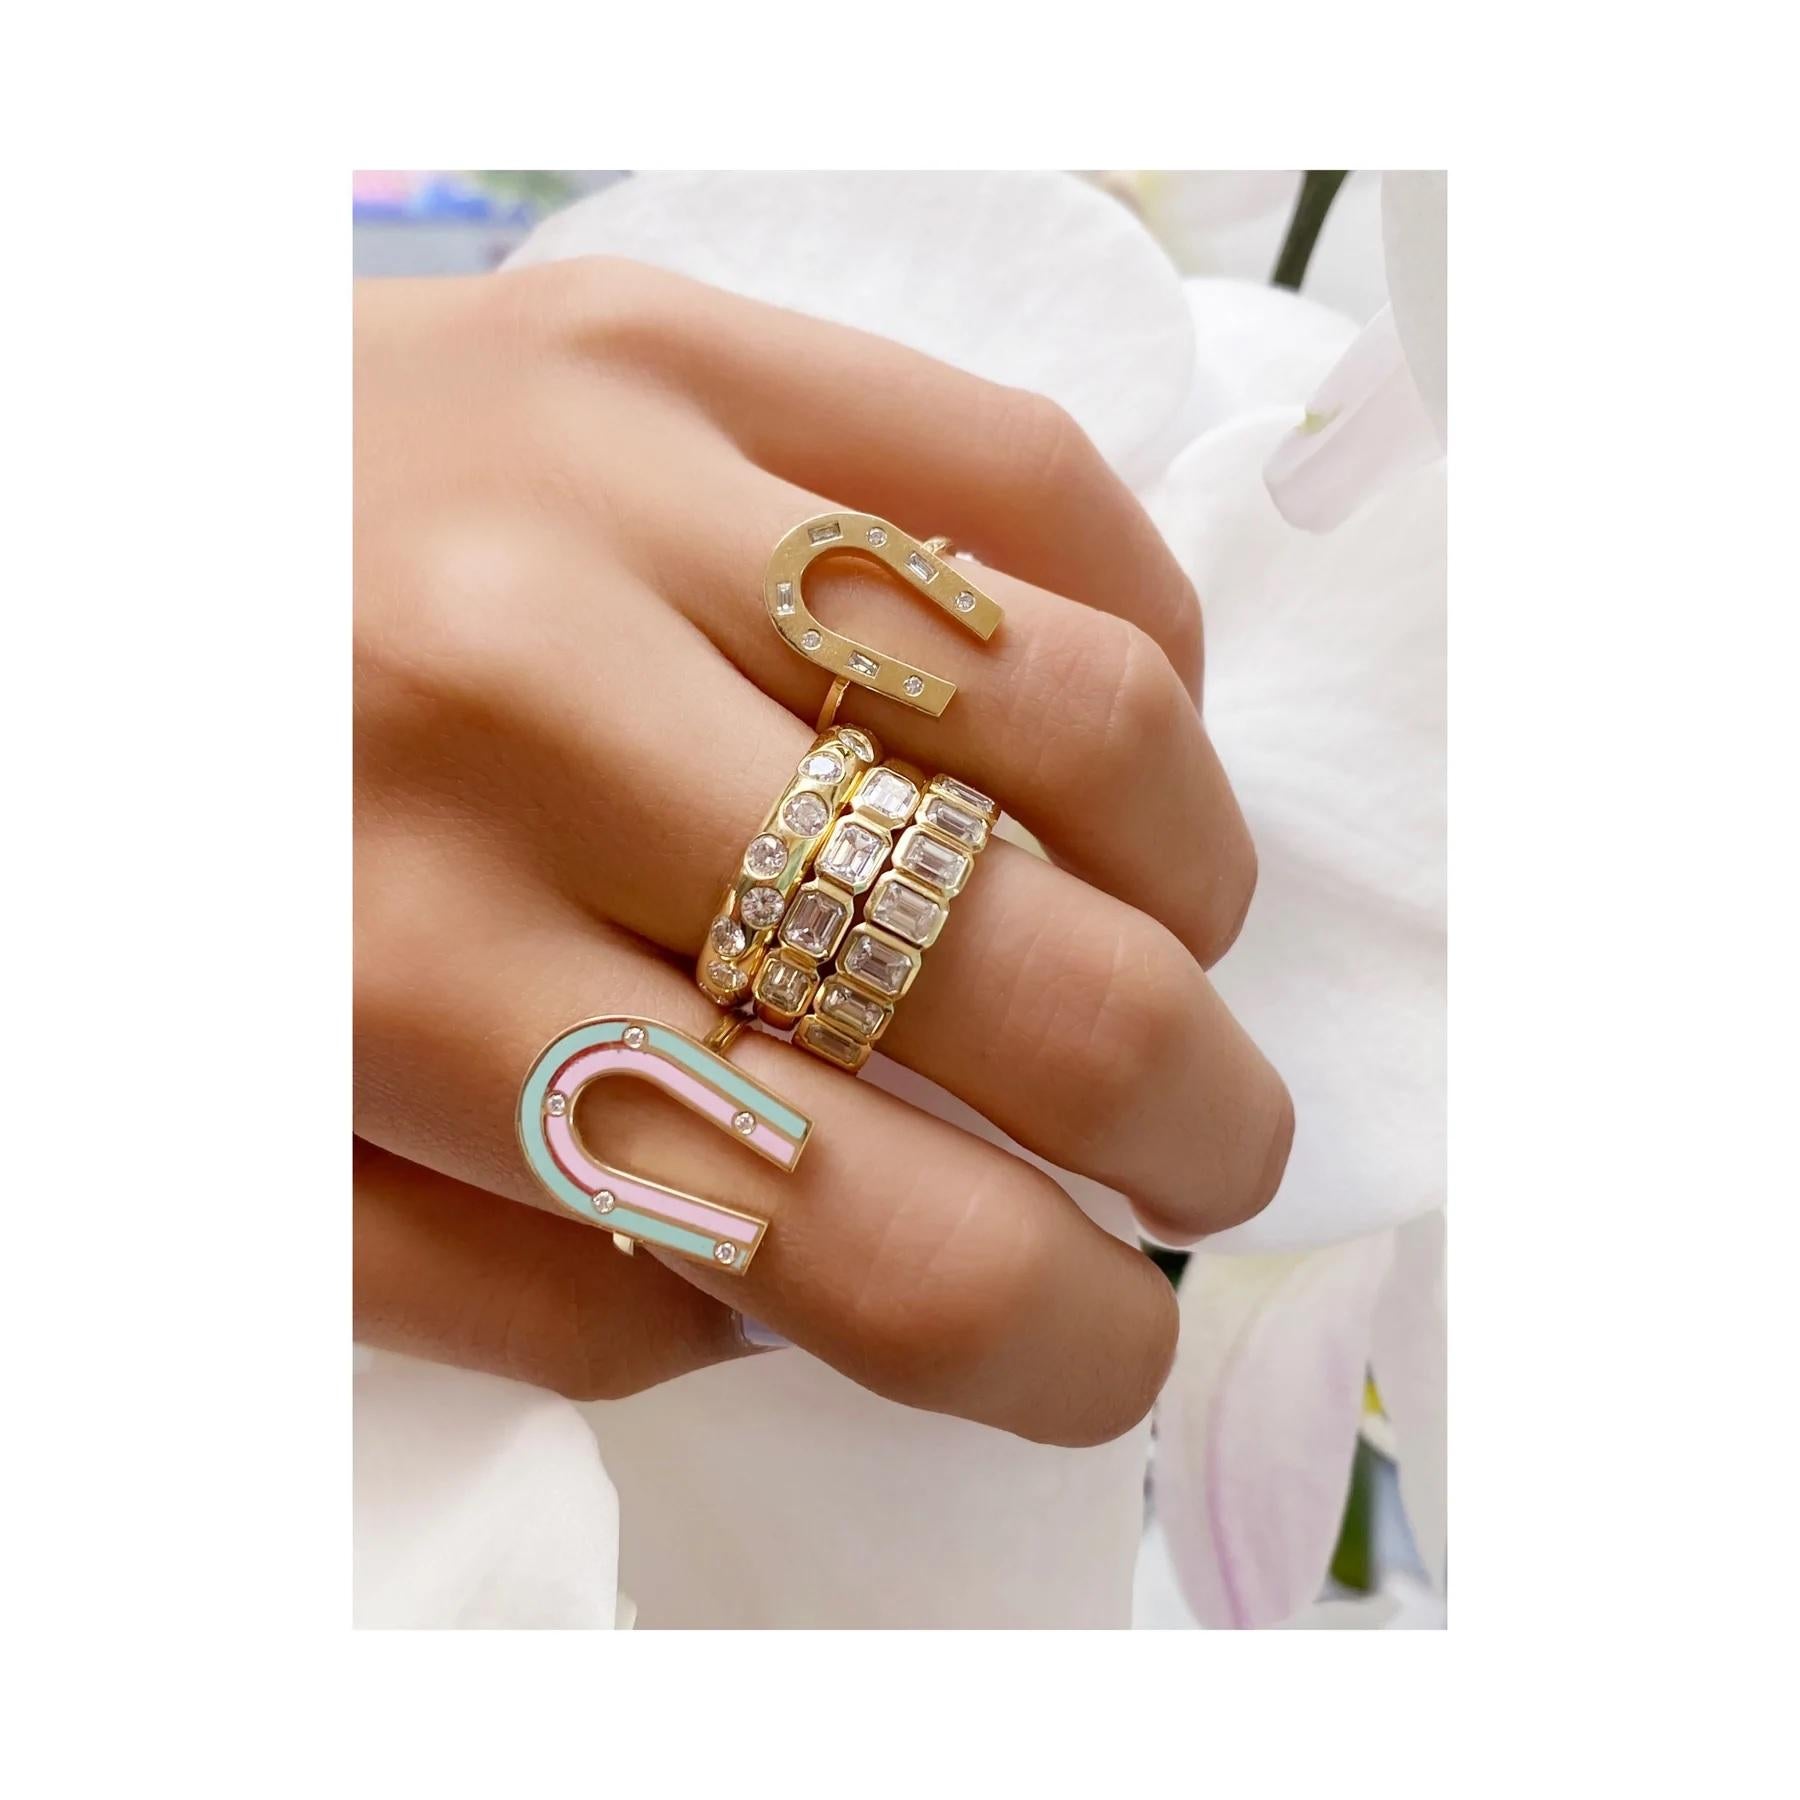 Magnetize your heart's desires and elevate your spring style with this gorgeous 14k and and Mixed Diamond ring. Inspired by the shape and form of magnets and horseshoes, symbols of attraction and good fortune; Use it as a modern talisman along with